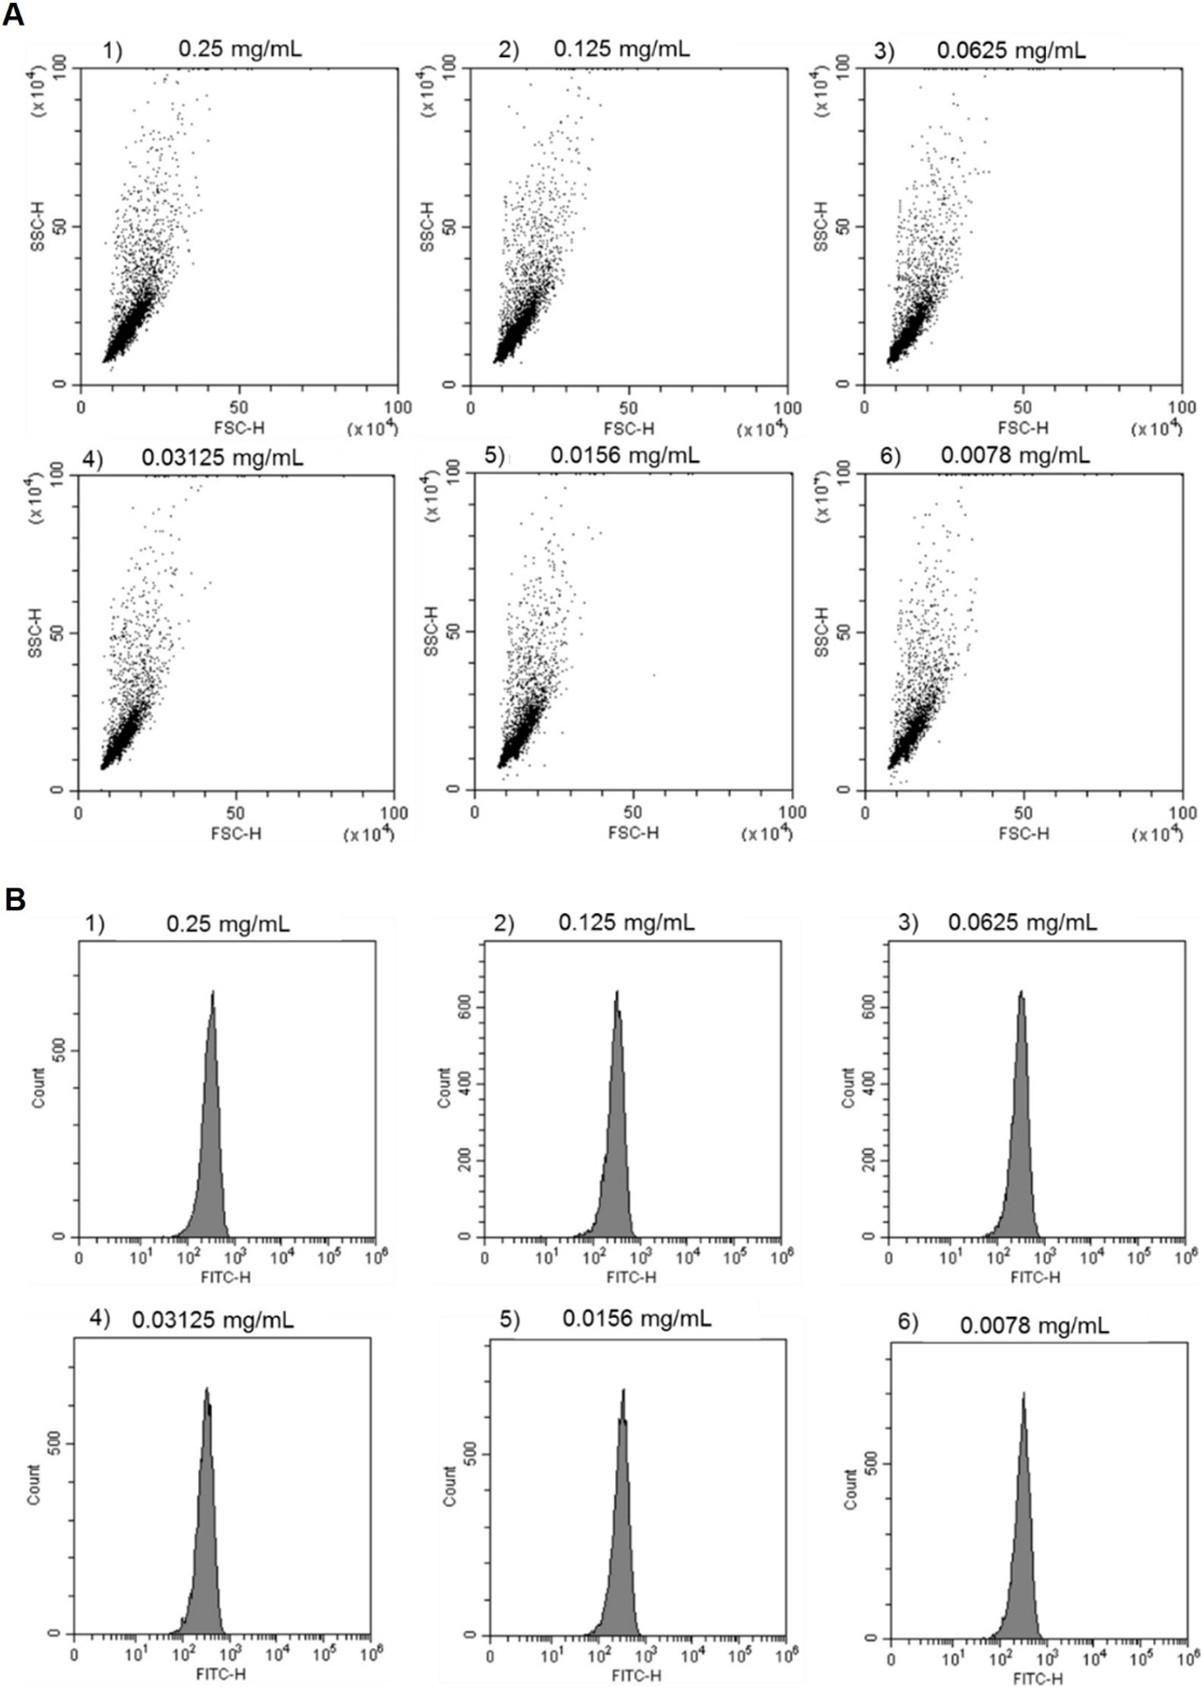 Investigation of PDGF-BB aptamer binding using growth factor-coated particles and flow cytometry